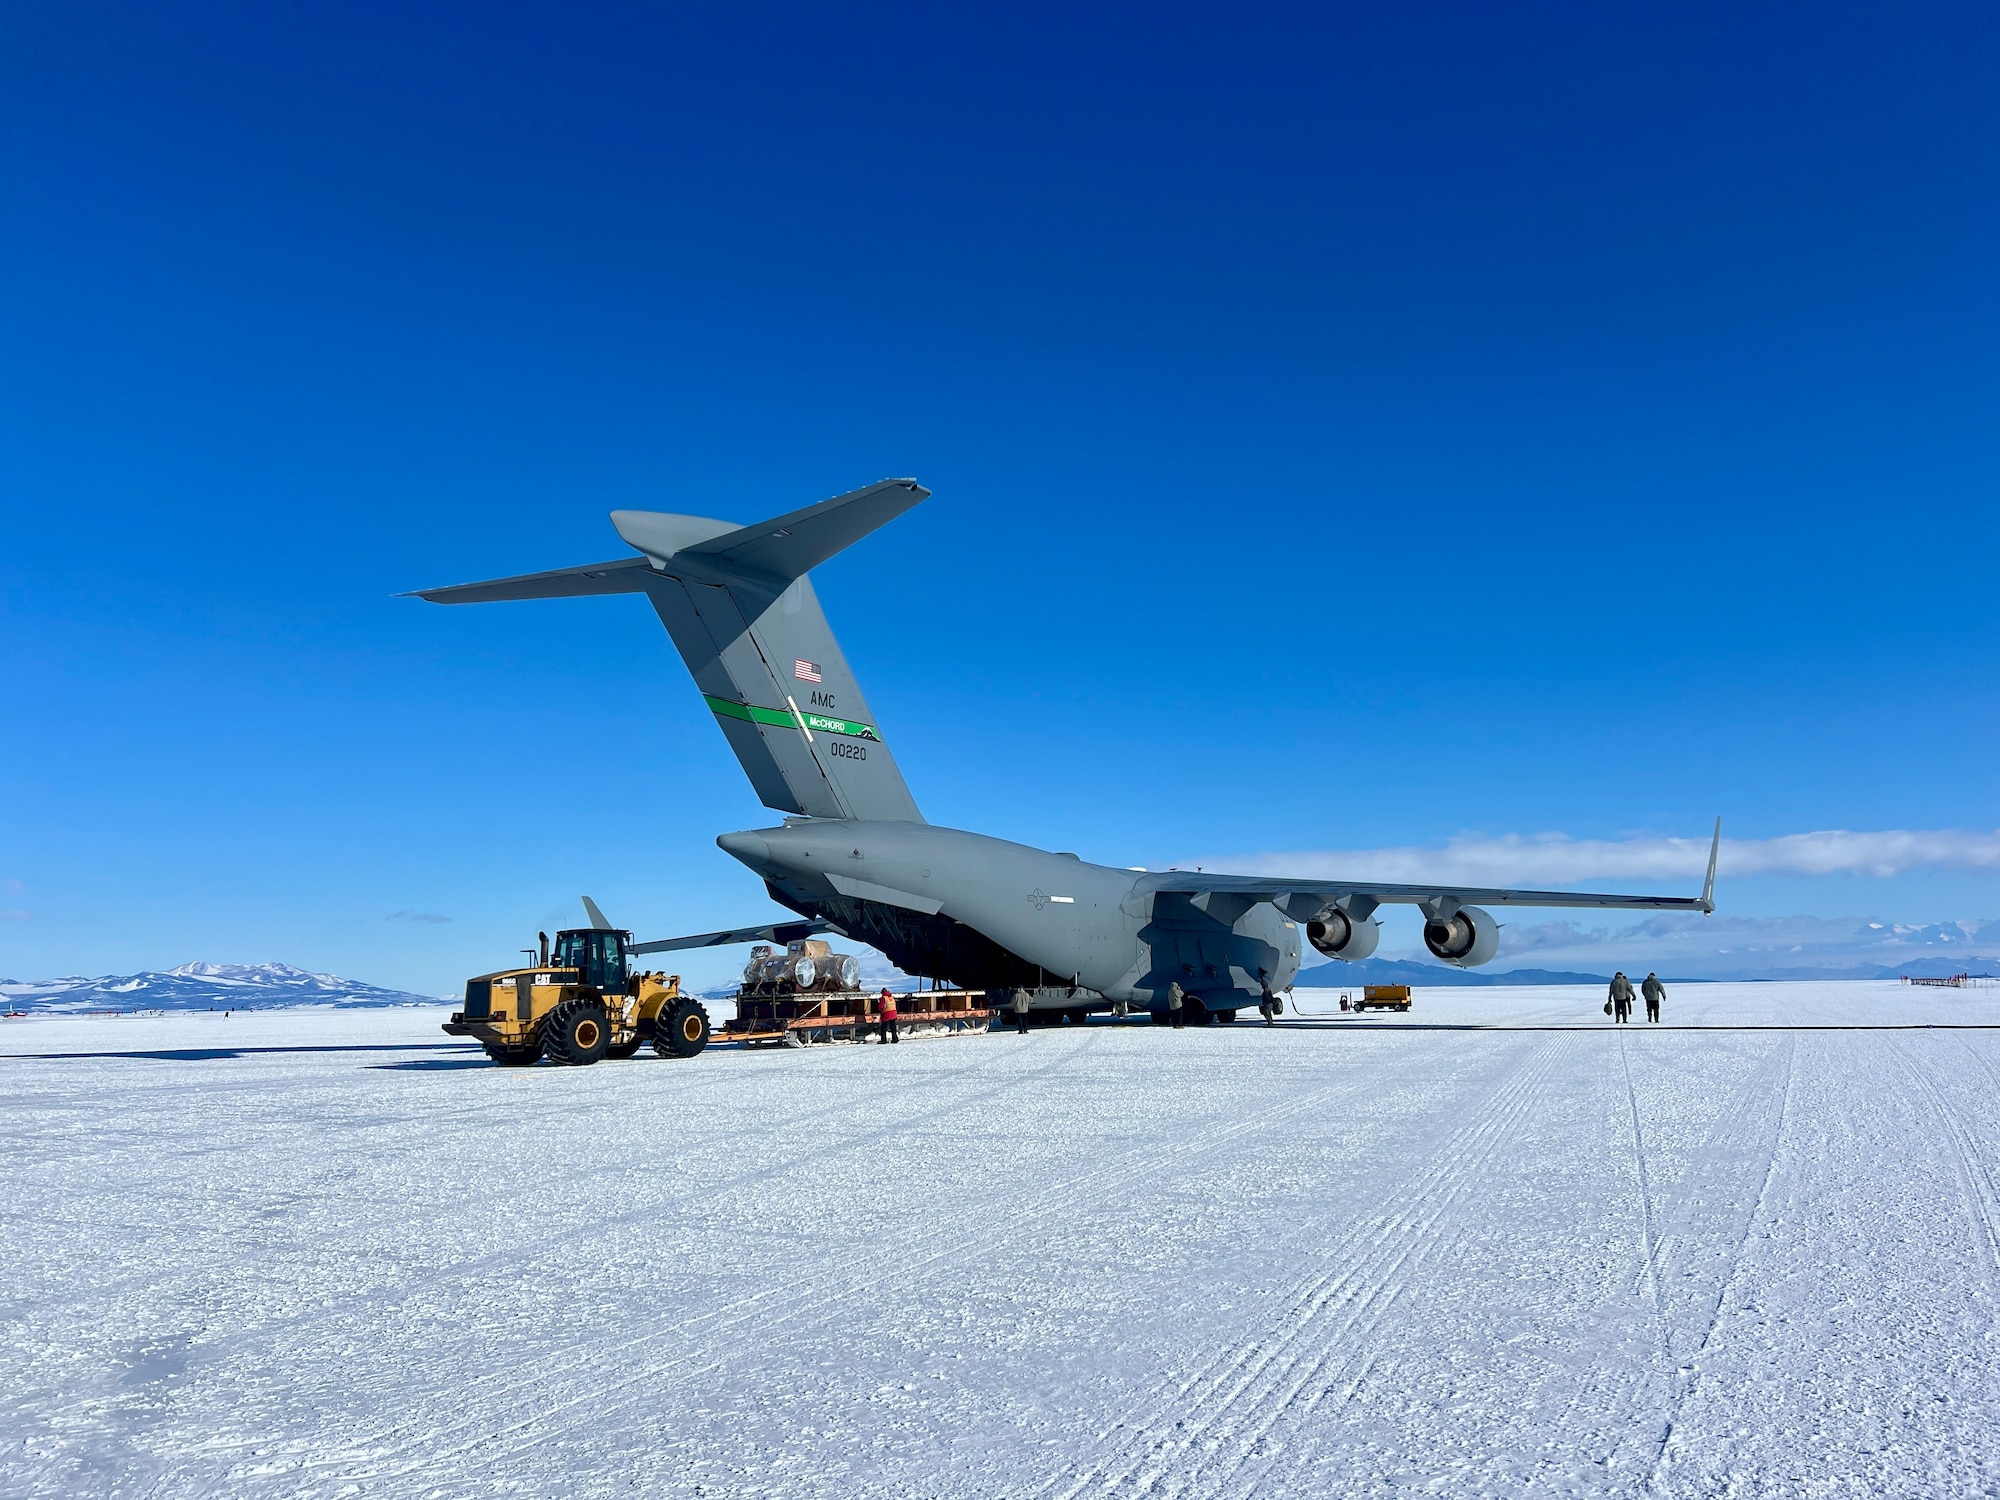 The C-17, with its small airfield footprint and capability to rapidly deploy helicopters, large concrete building supports, vehicles, station machinery and equipment, food, and personnel, has proven to be the ideal aircraft to provide support for science exploration in Antarctica. Operation Deep Freeze (ODF) is crucial in building relationships with partner nations like New Zealand as well as providing Department of Defense logistical support to the National Science Foundation (NSF) for their continued research with the U.S. Antarctic Program.